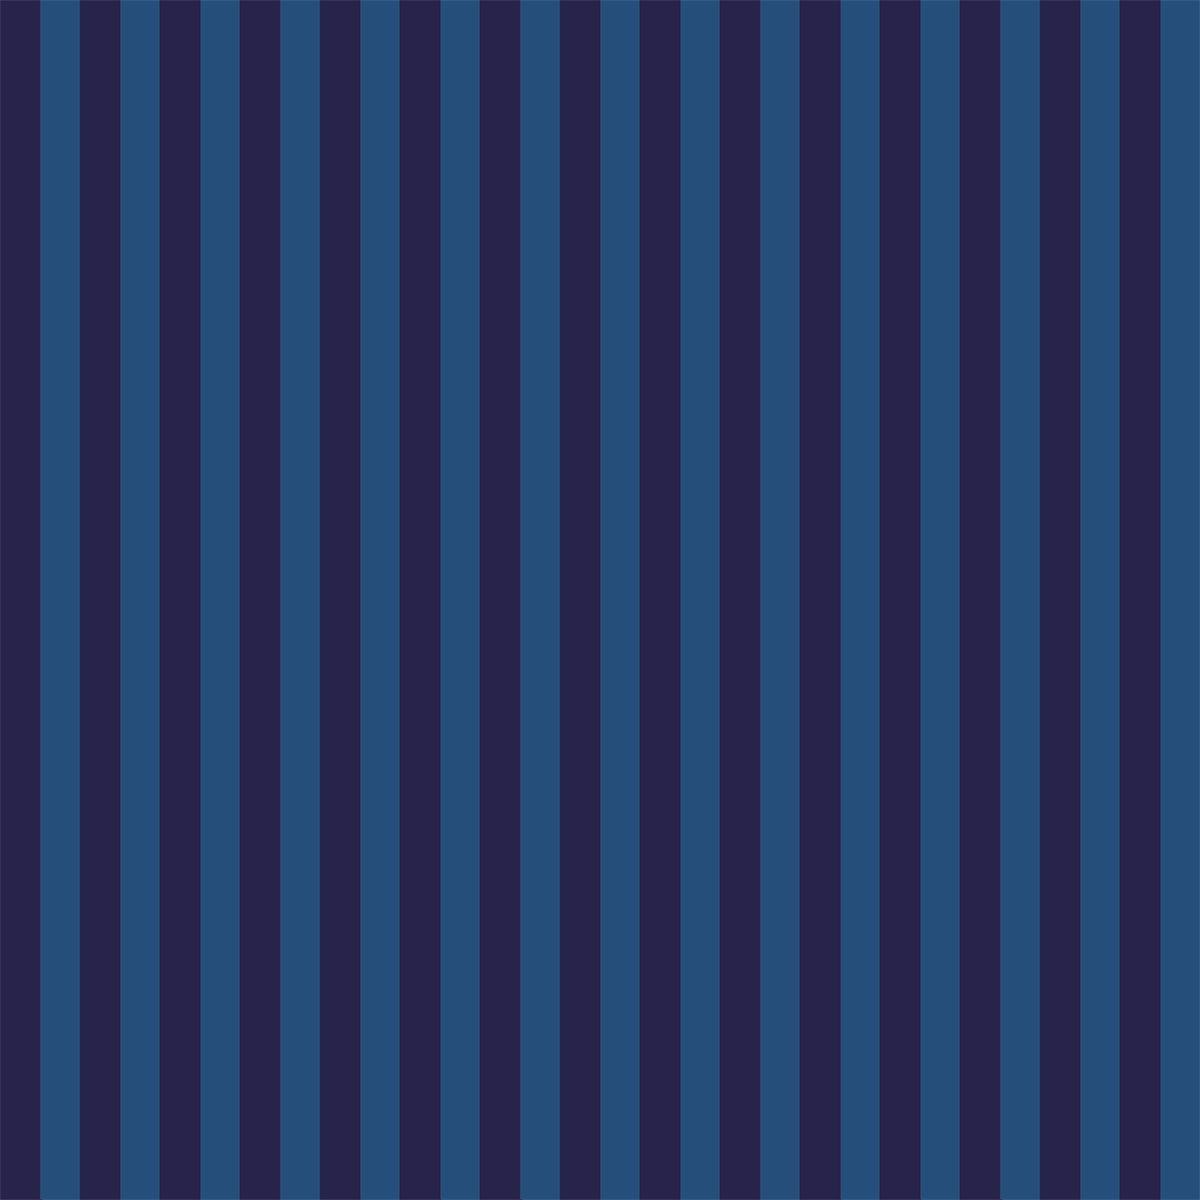 Dark blue and Light blue Stripes Portrait Fabric Photography Backdrops